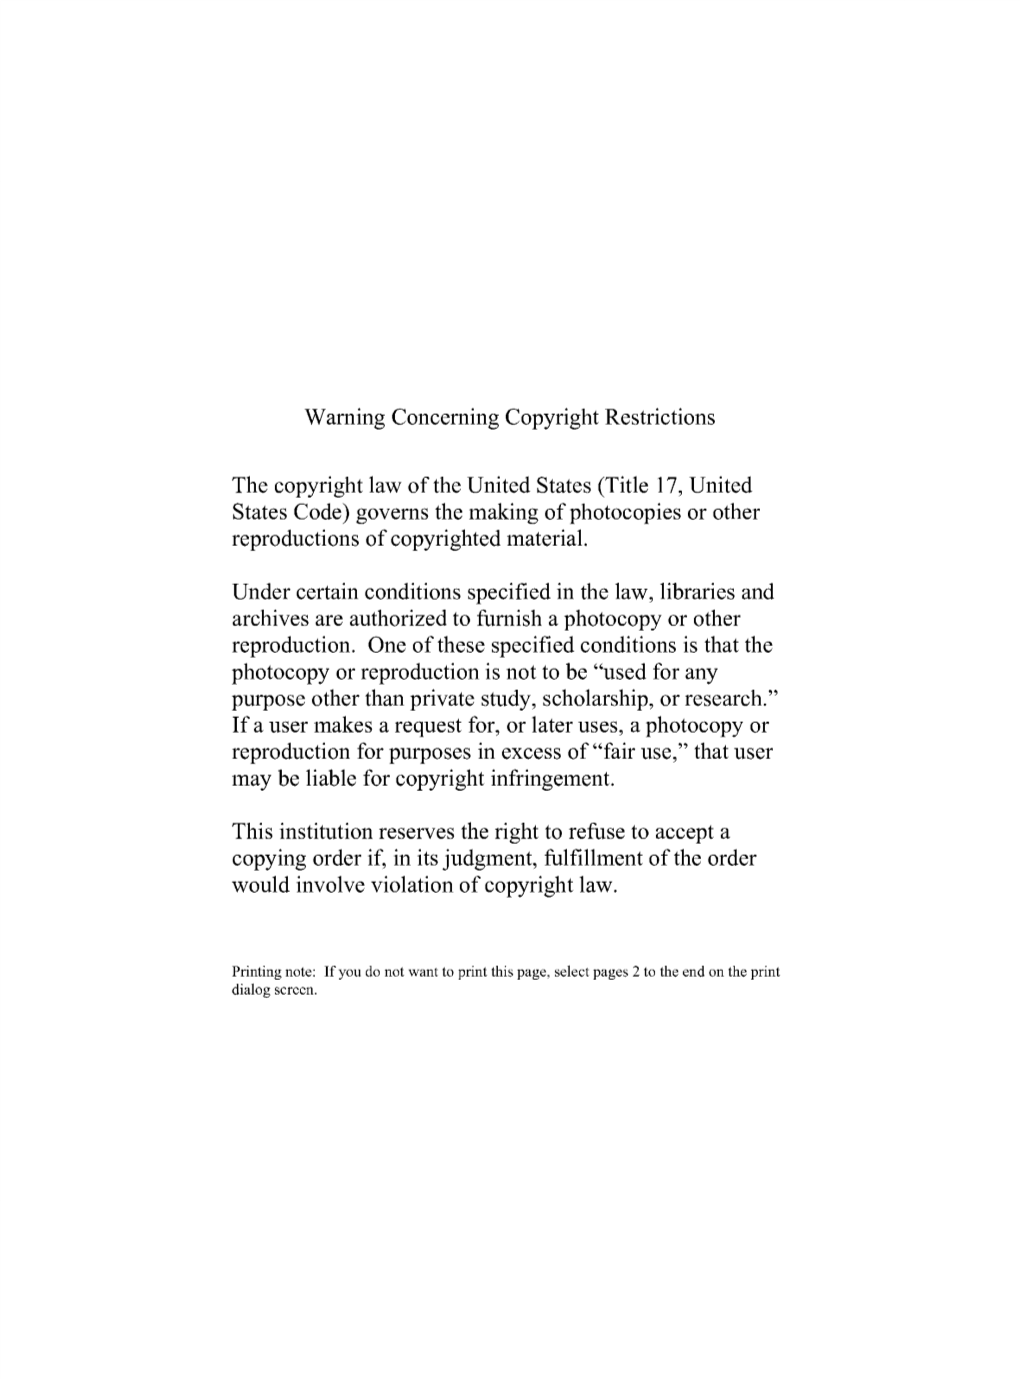 Warning Concerning Copyright Restrictions the Copyright Law Of